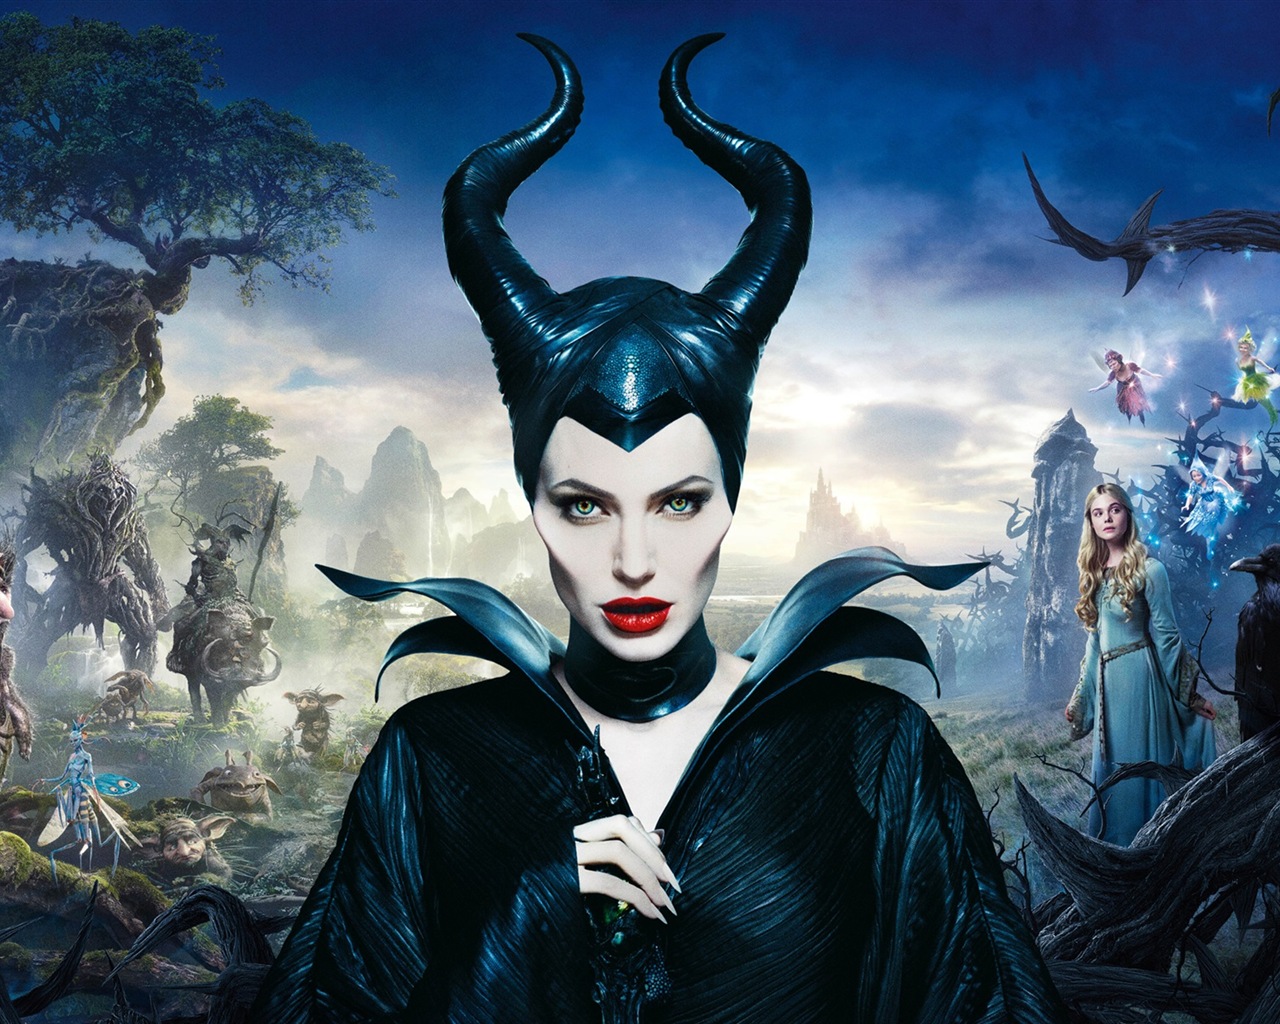 Maleficent 2014 HD movie wallpapers #6 - 1280x1024